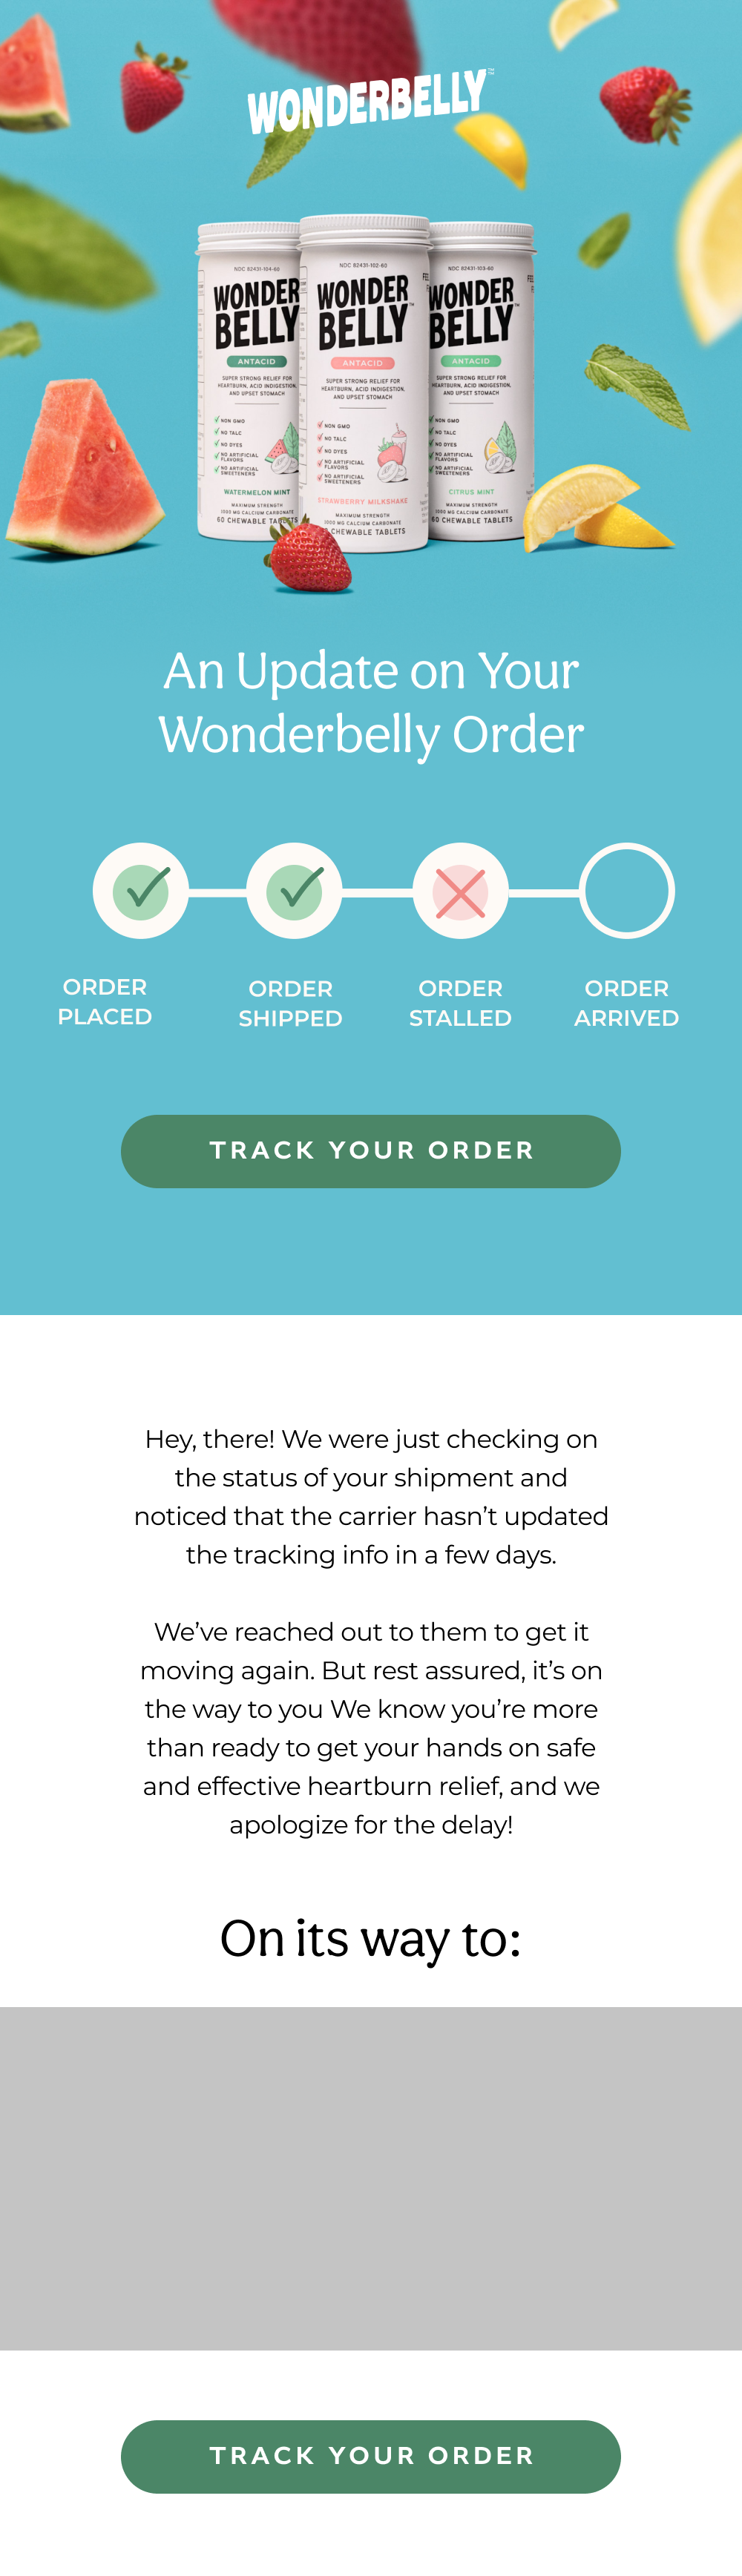 Wonderbelly Delayed Shipment Notification Food and Beverage Email Template 